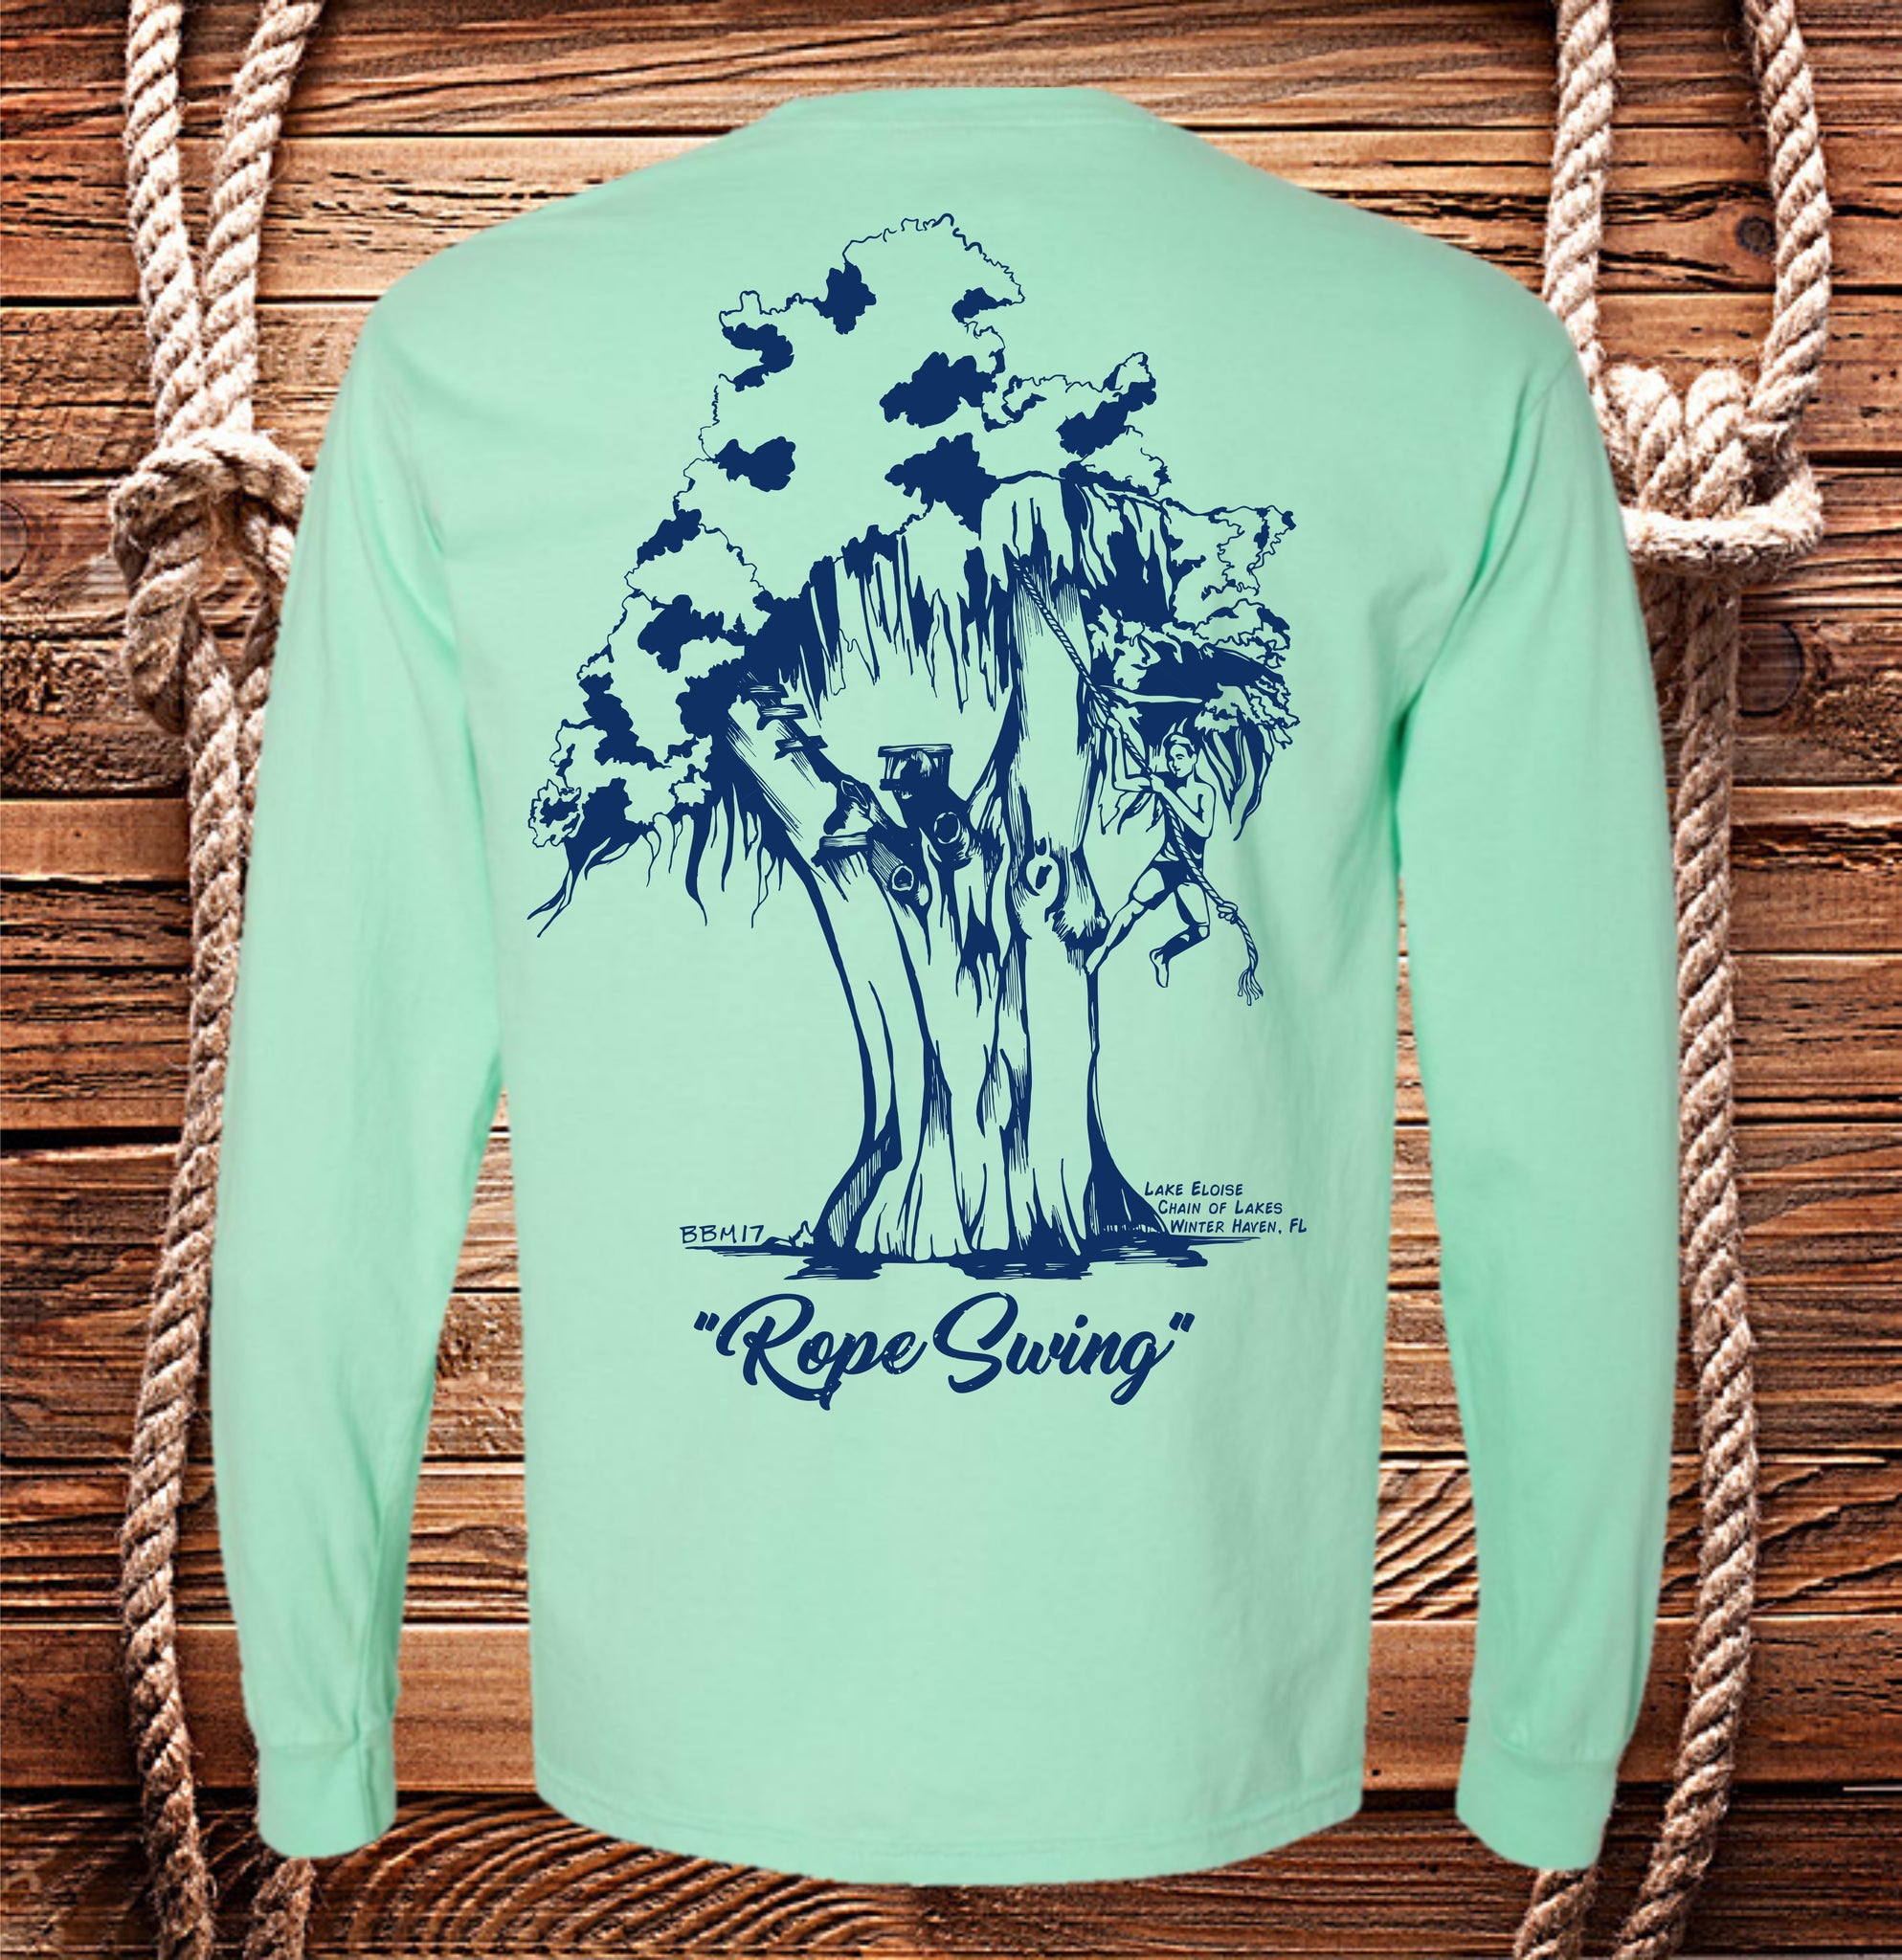 Rope Swing on Lake Eloise T-shirt, Long Sleeve, Hand Drawn by Local Brooke-Braddy Moore available in 6 colors